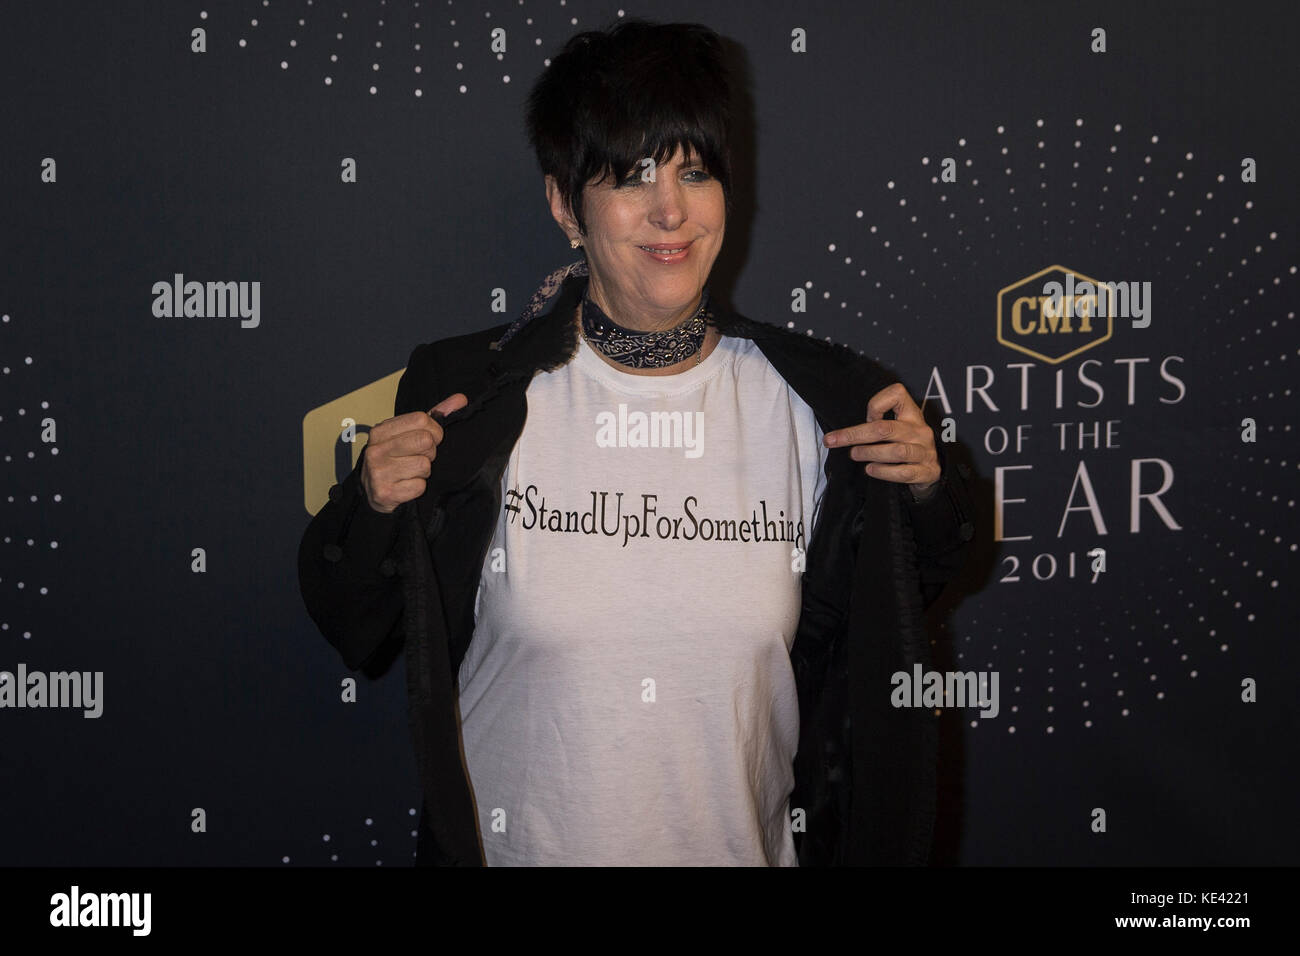 Nashville, Tenessee, USA. 18th Oct, 2017. NASHVILLE, TN - Songwriter Dianne Warren shows off a Stand Up For Something shirt on on the red carpet at the 2017 CMT Artists of the Year at the Schermerhorn Symphony Center in Nashville, TN. Credit: The Photo Access/Alamy Live News Stock Photo